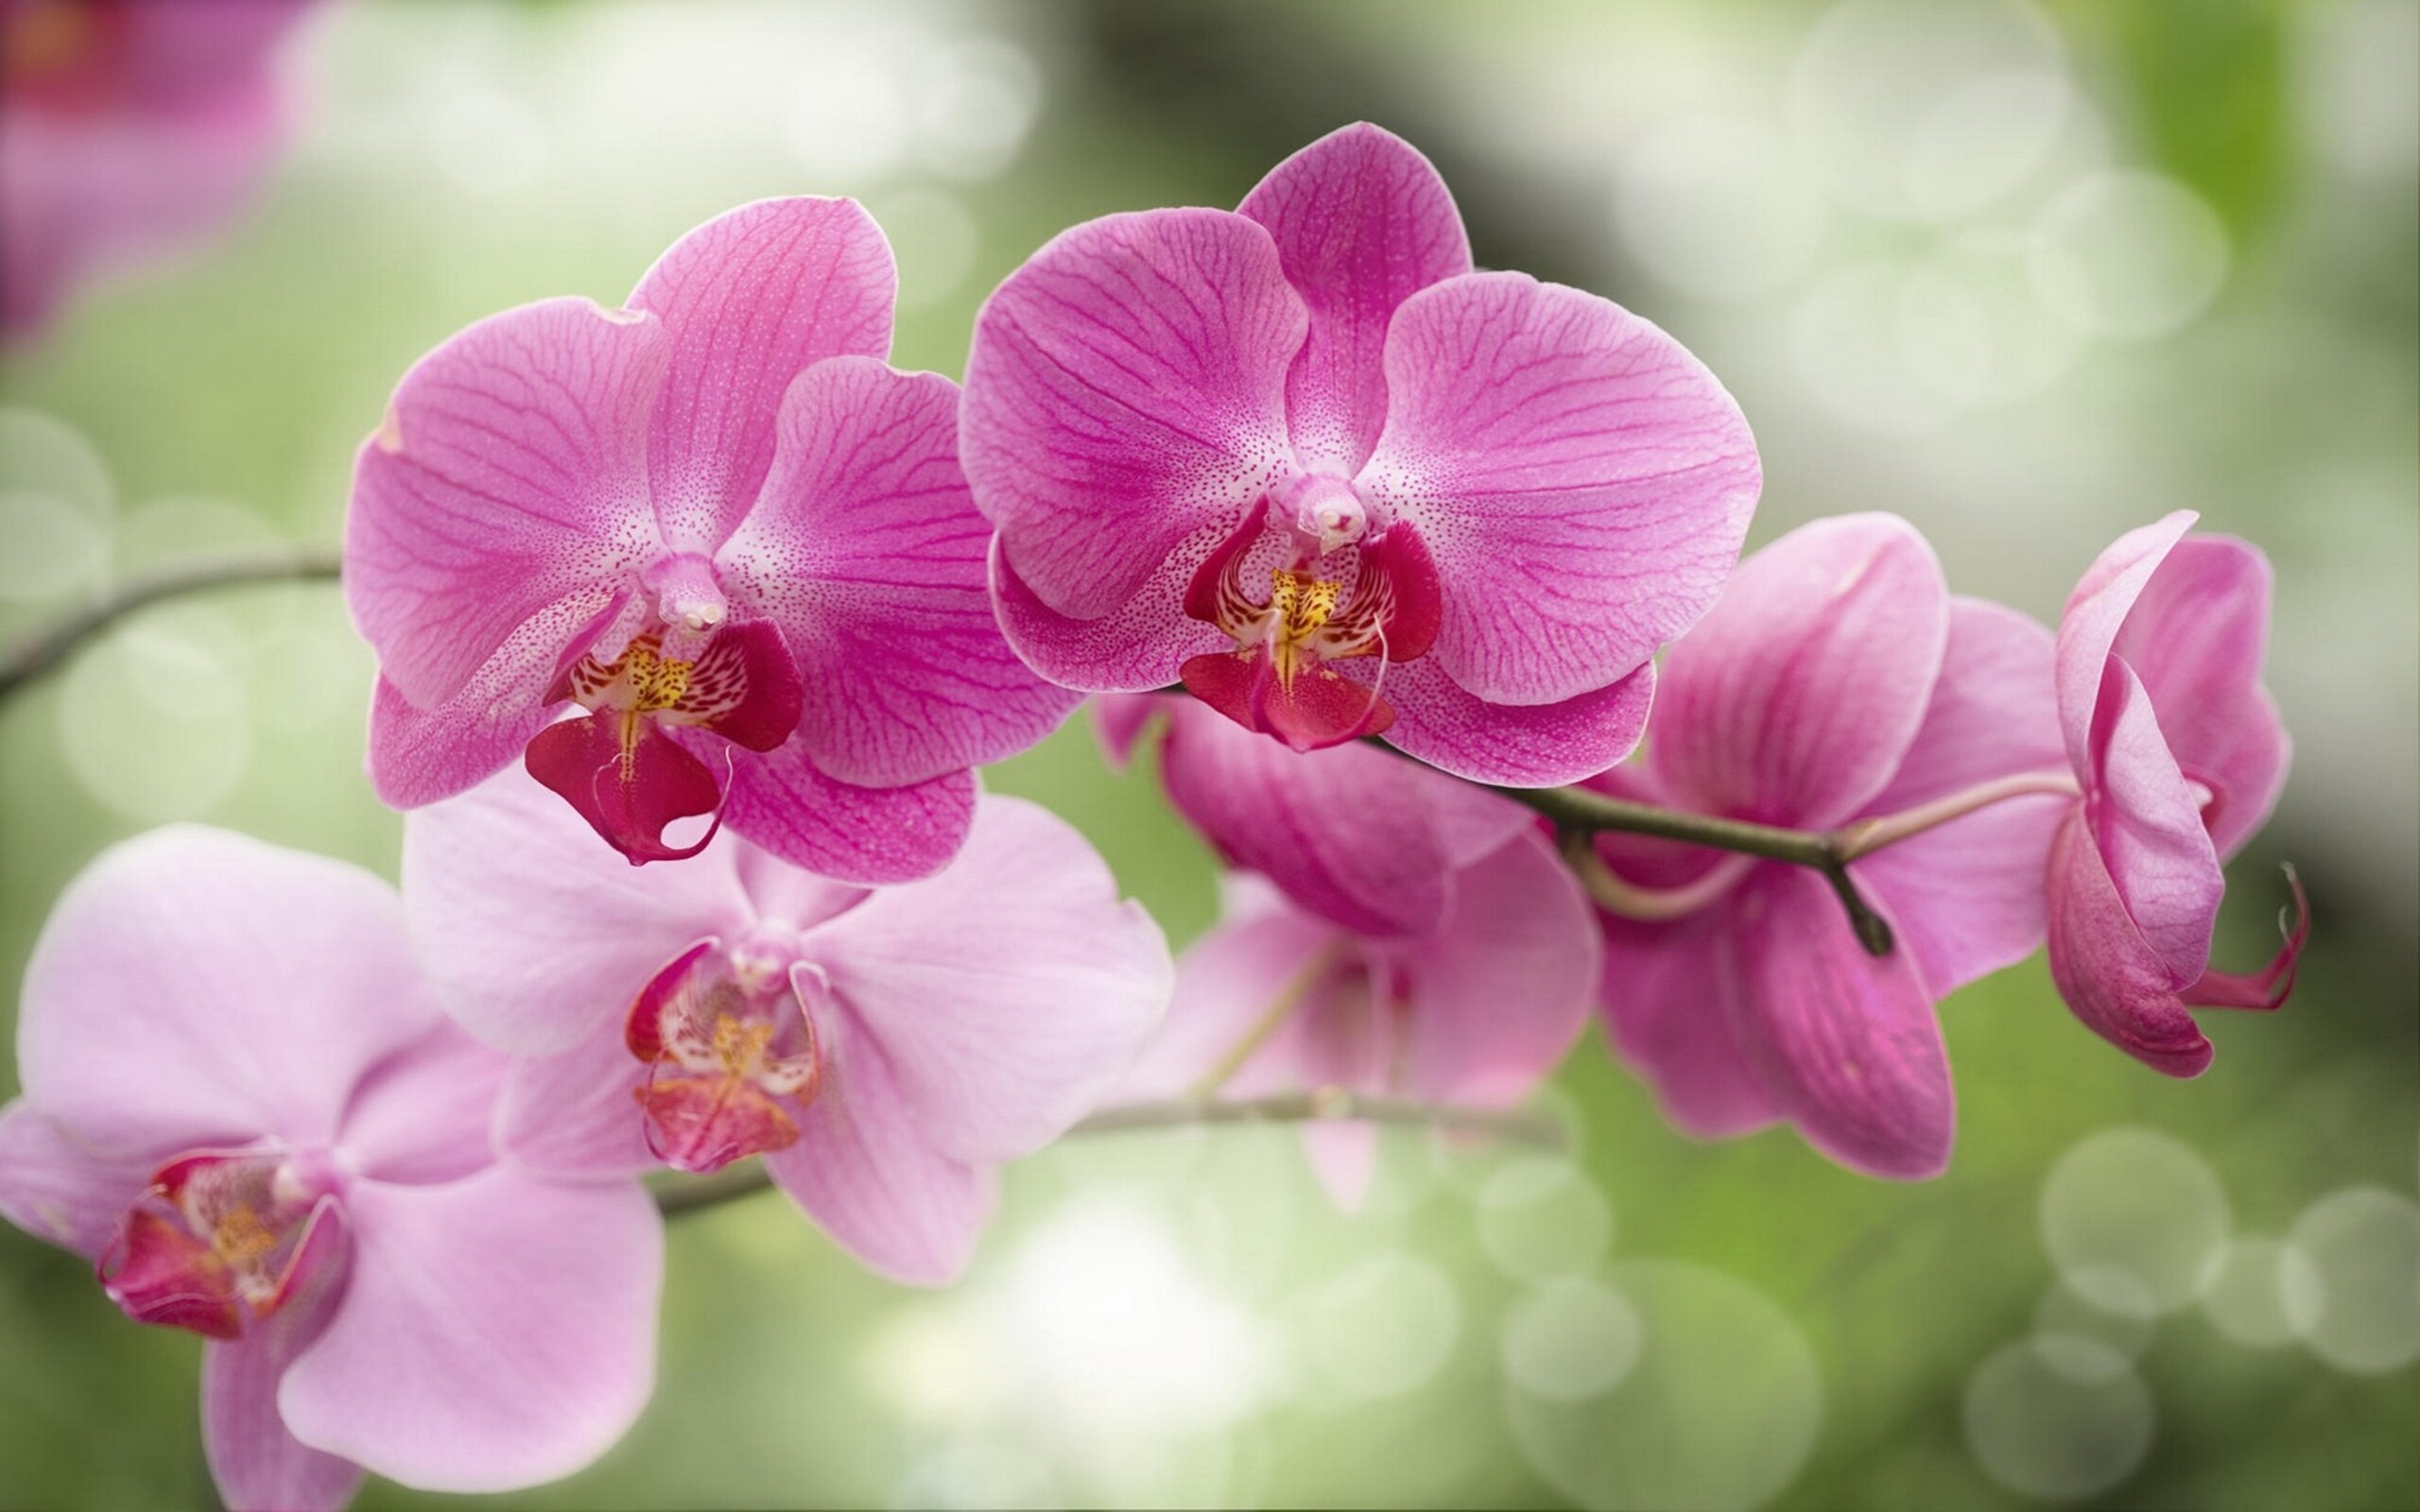 Orchid: The three sepals and two of the petals are often similar to each other but one petal is usually highly modified, forming a "lip" or labellum. 2560x1600 HD Wallpaper.